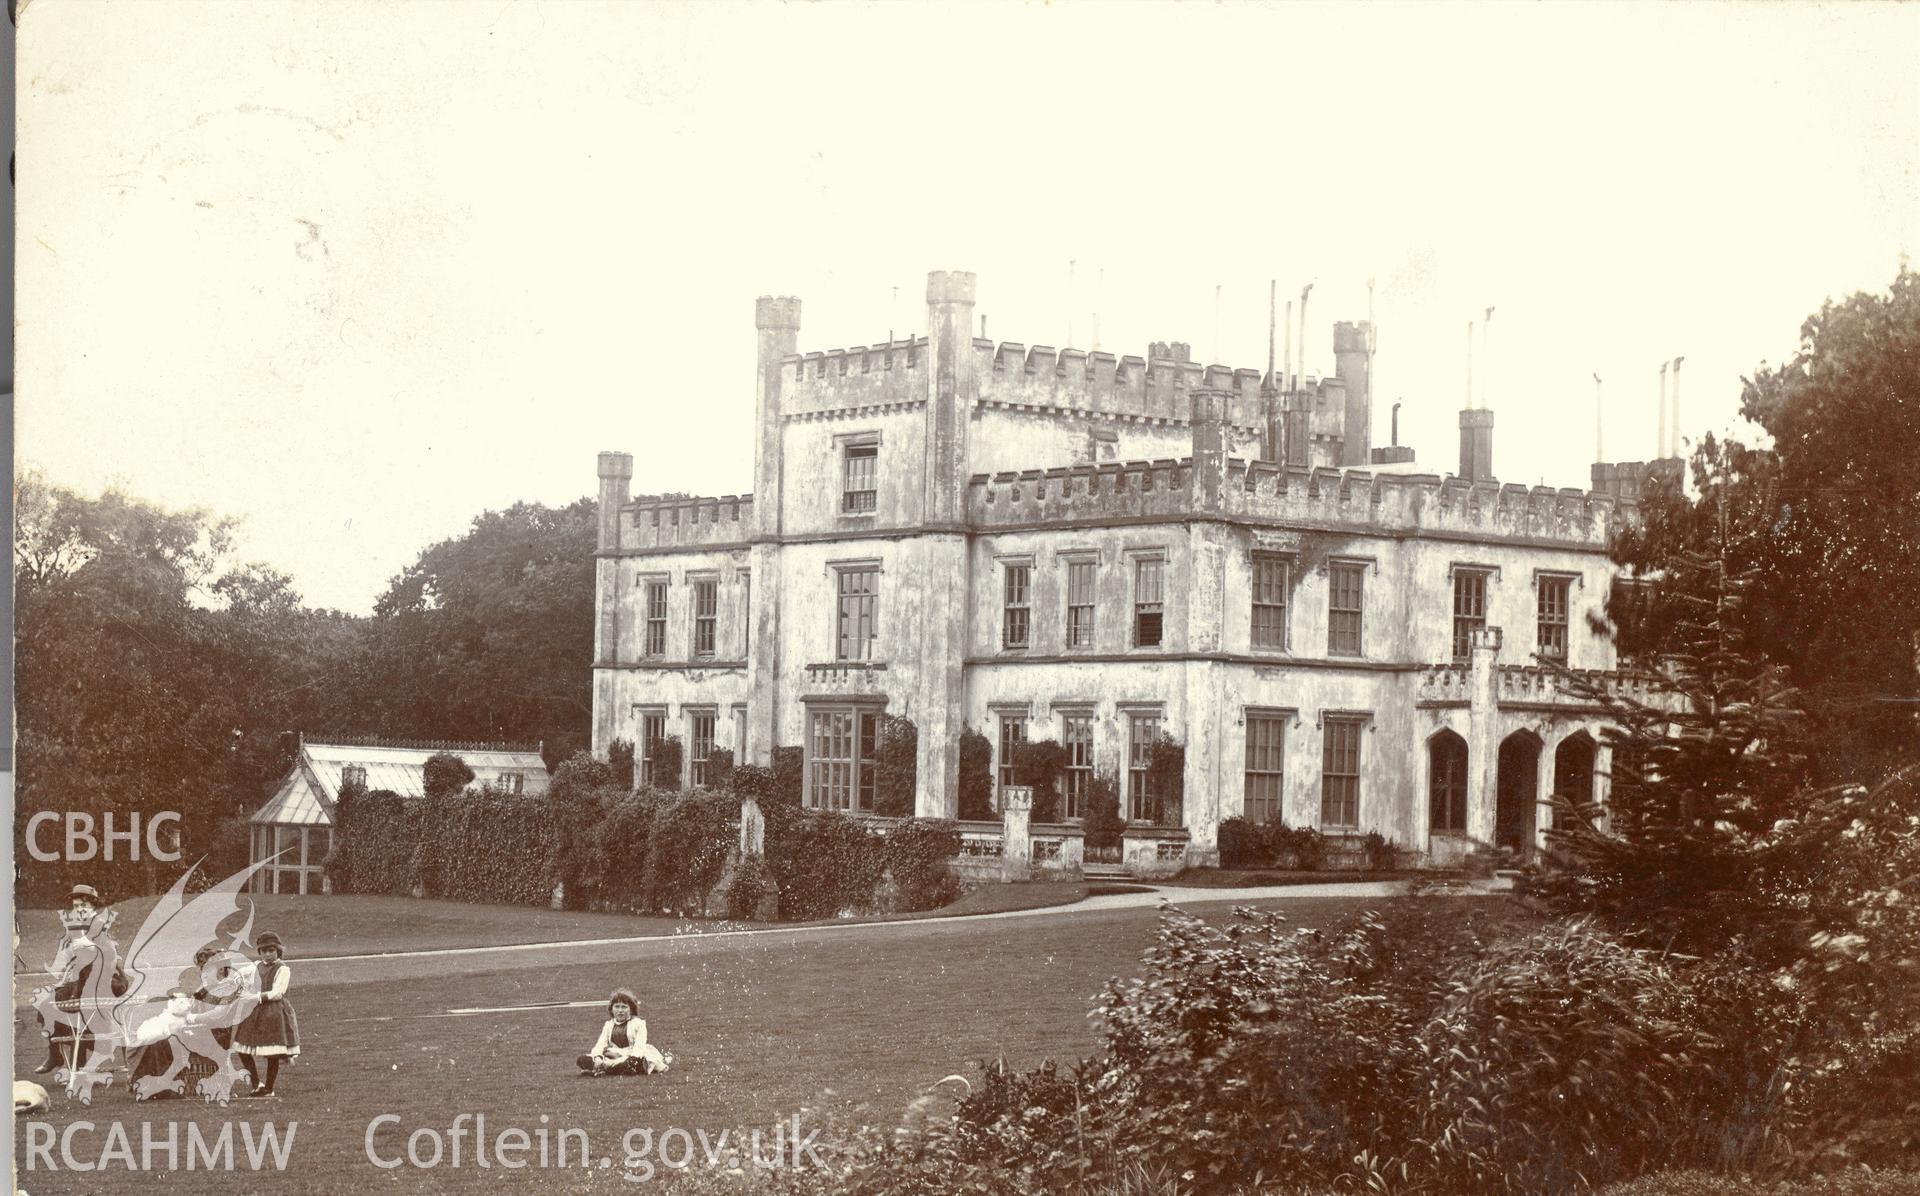 Digitised postcard image of St Brides Castle. Produced by Parks and Gardens Data Services, from an original item in the Peter Davis Collection at Parks and Gardens UK. We hold only web-resolution images of this collection, suitable for viewing on screen and for research purposes only. We do not hold the original images, or publication quality scans.